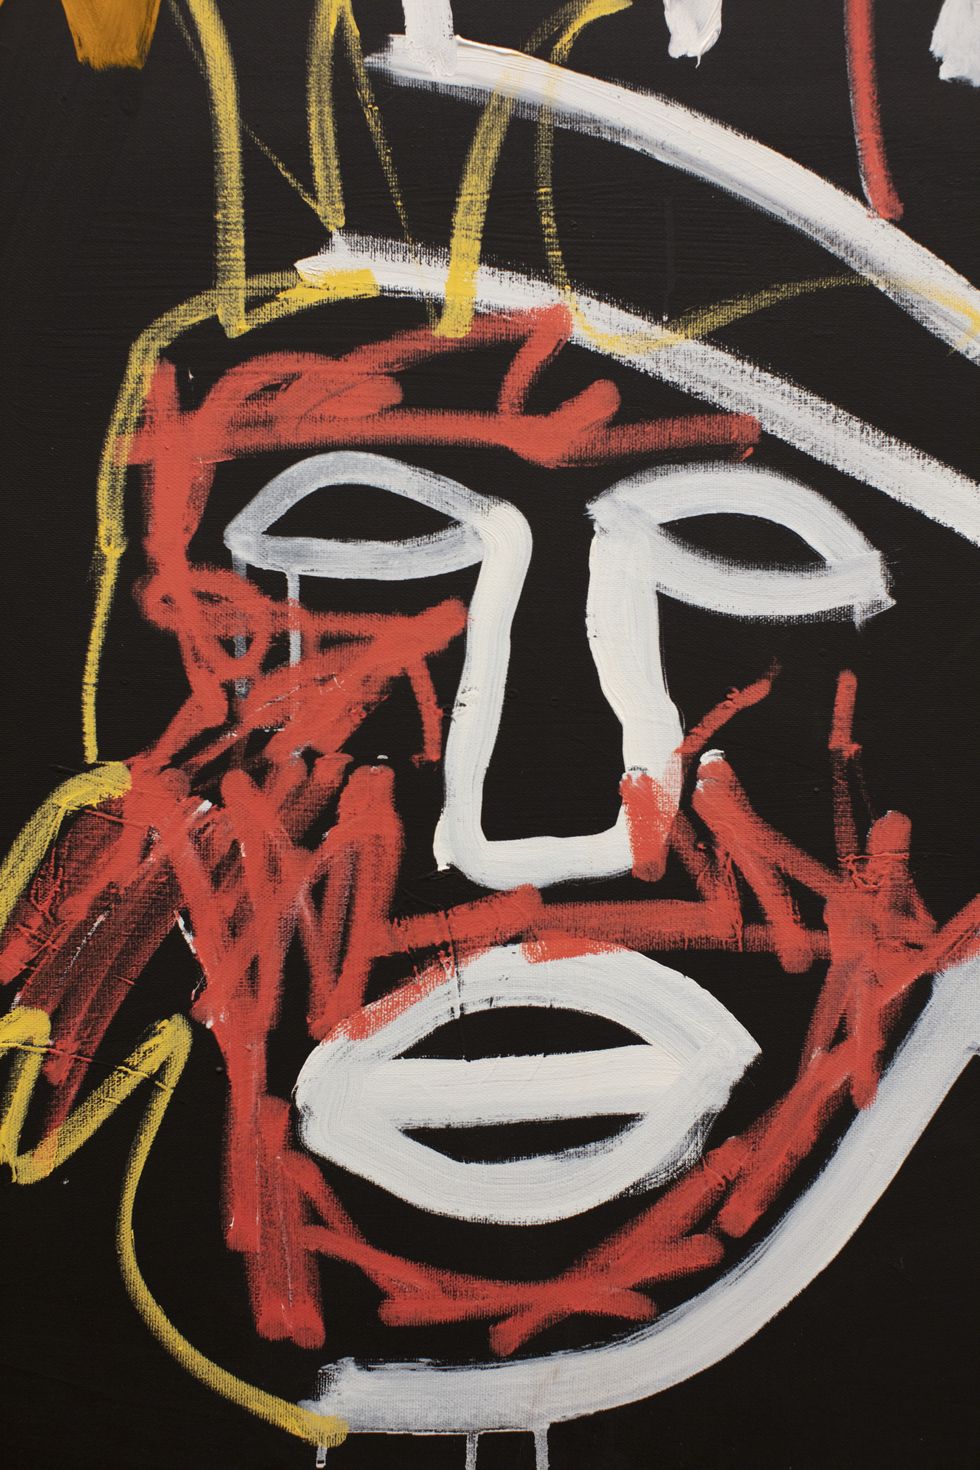 artwork jean michel basquiat, "untitled cowboy and indian", 1982 detail, acrylic and oil stick on canvas,  50 x 105 in 127 x 2667 cm artwork © the estate of jean michel basquiat, licensed by artestar, new york